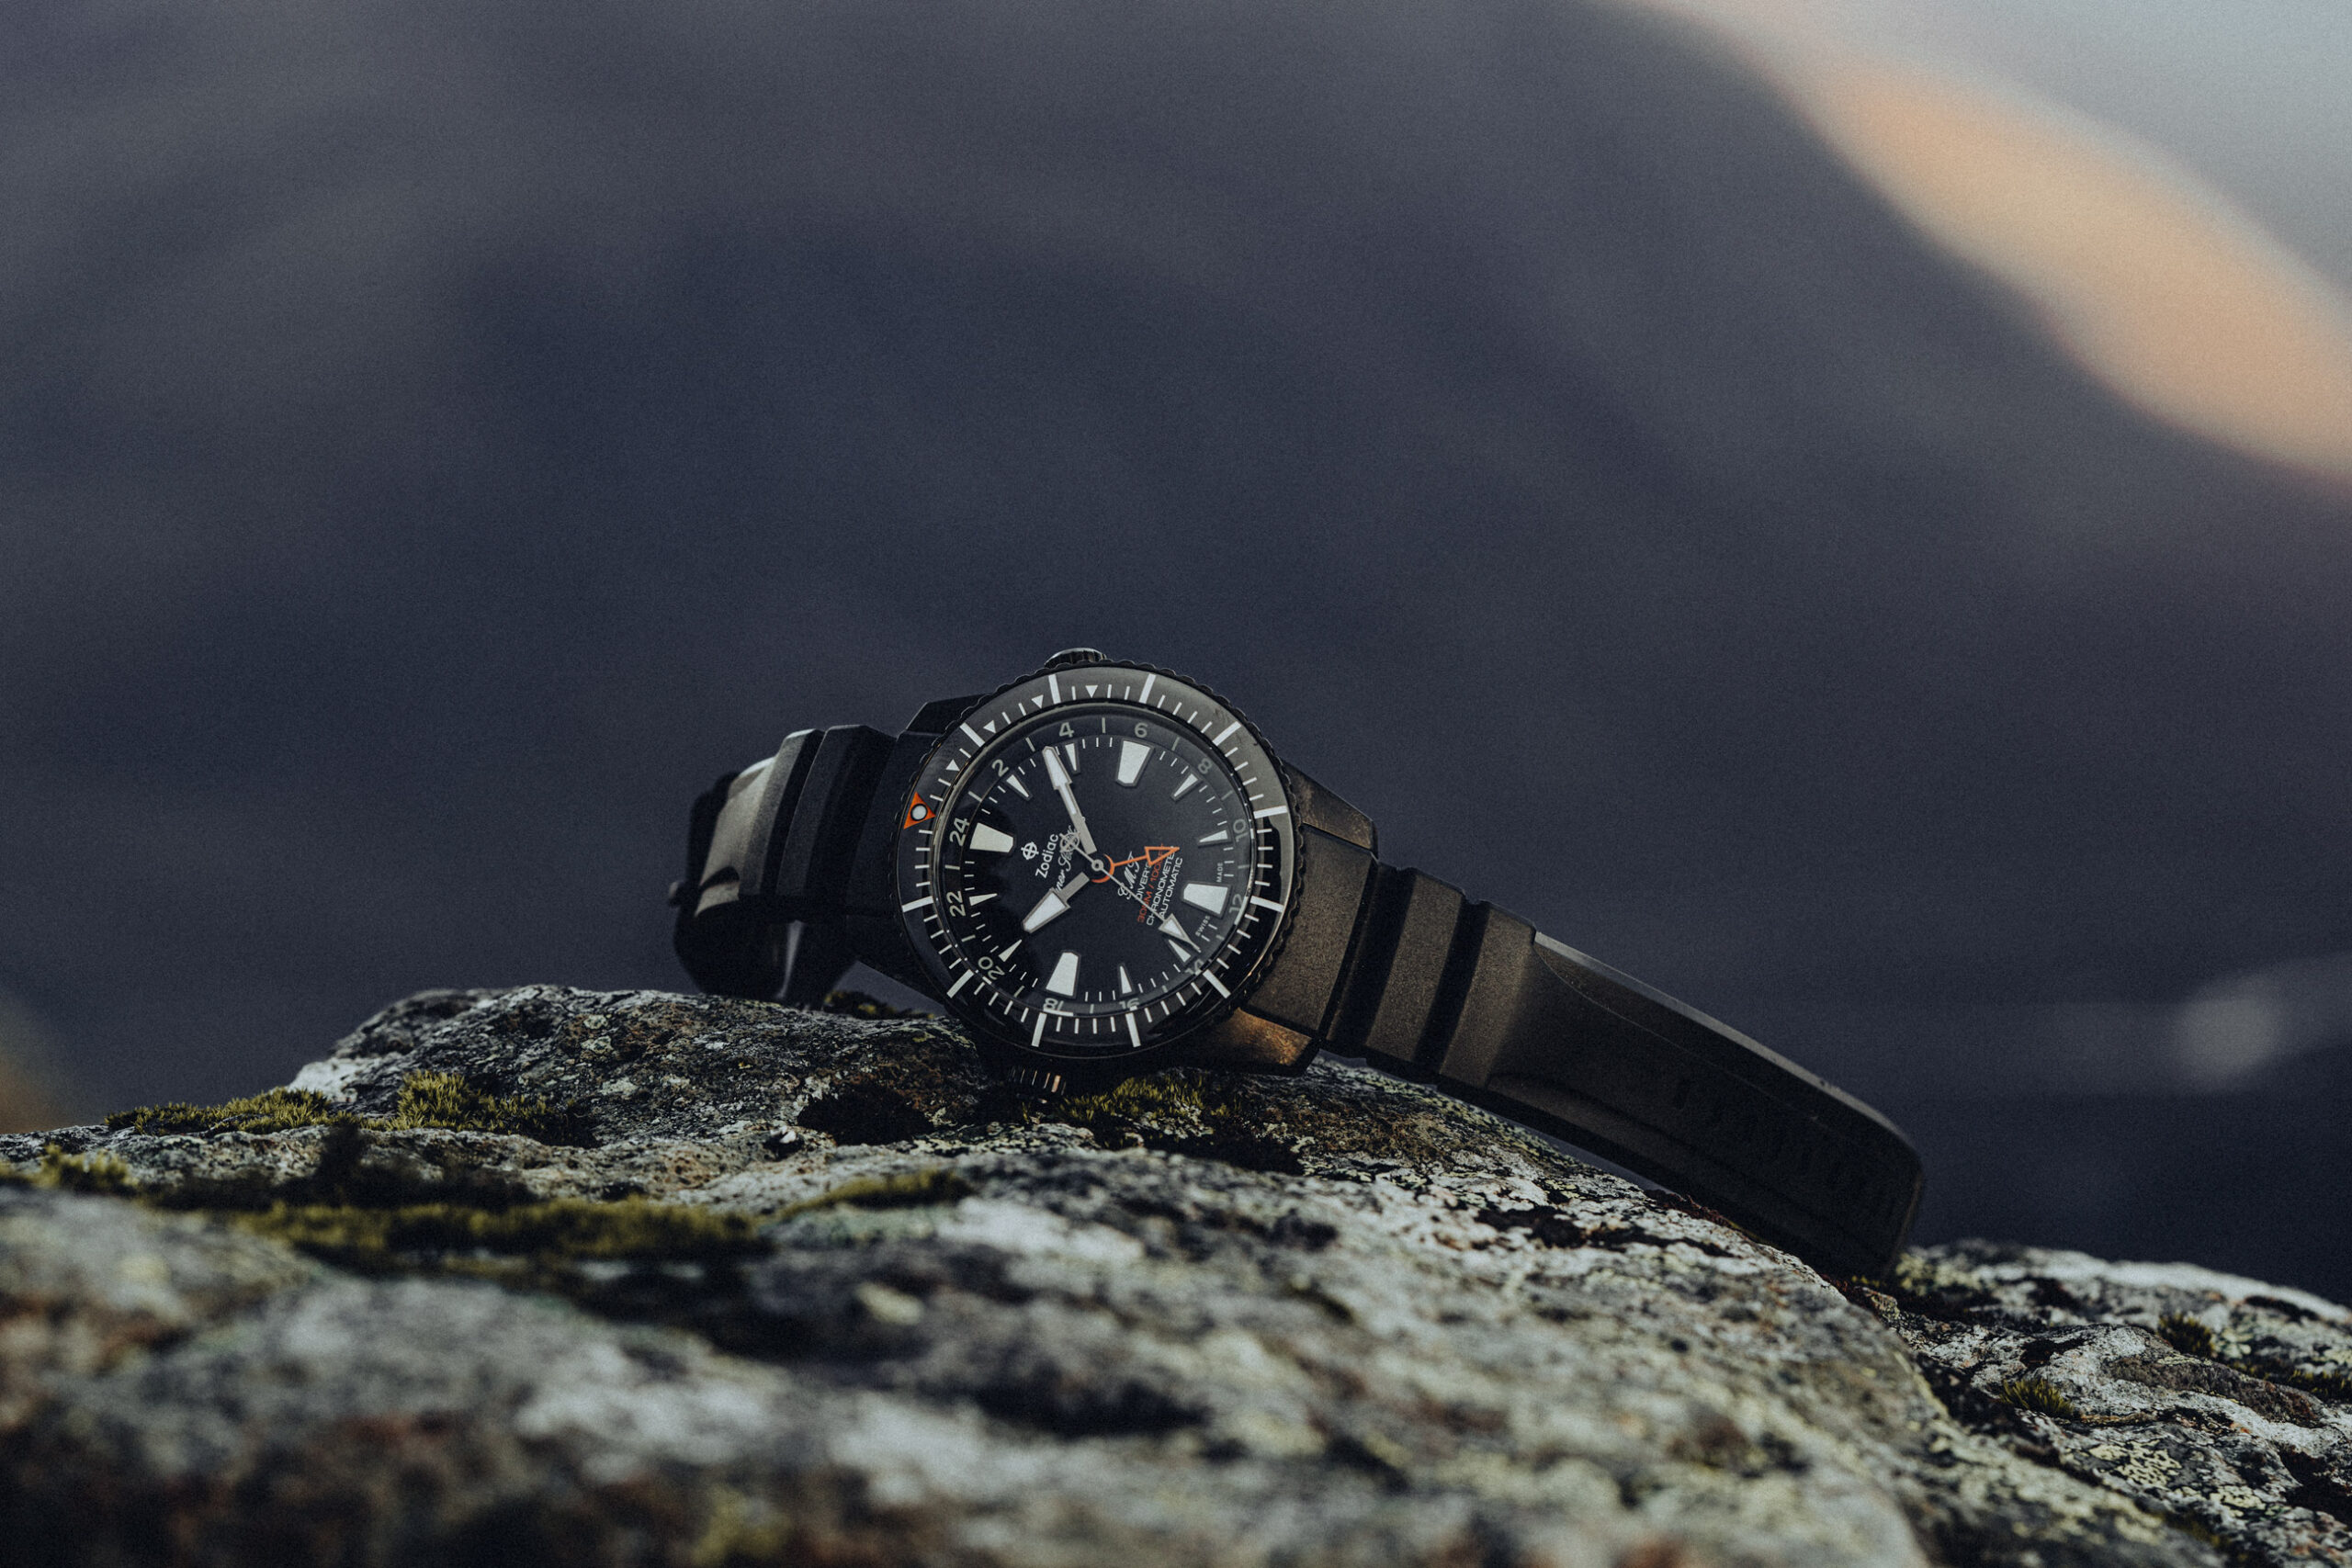 Hiking in Glen Coe With The Zodiac Super Sea Wolf LHD Pro-Diver GMT